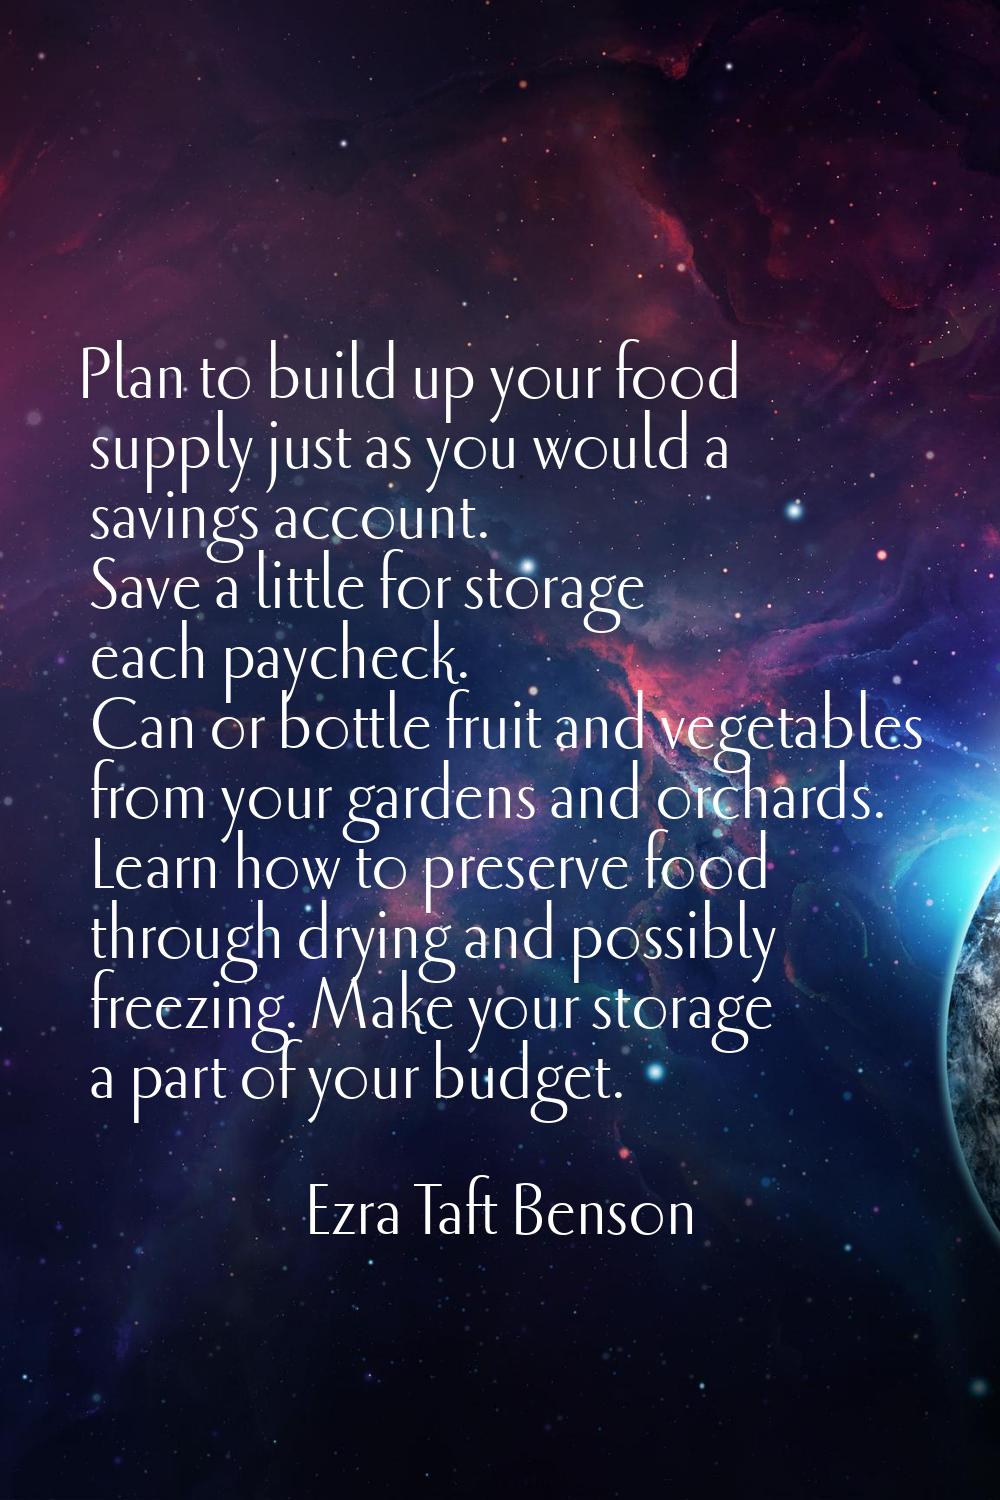 Plan to build up your food supply just as you would a savings account. Save a little for storage ea